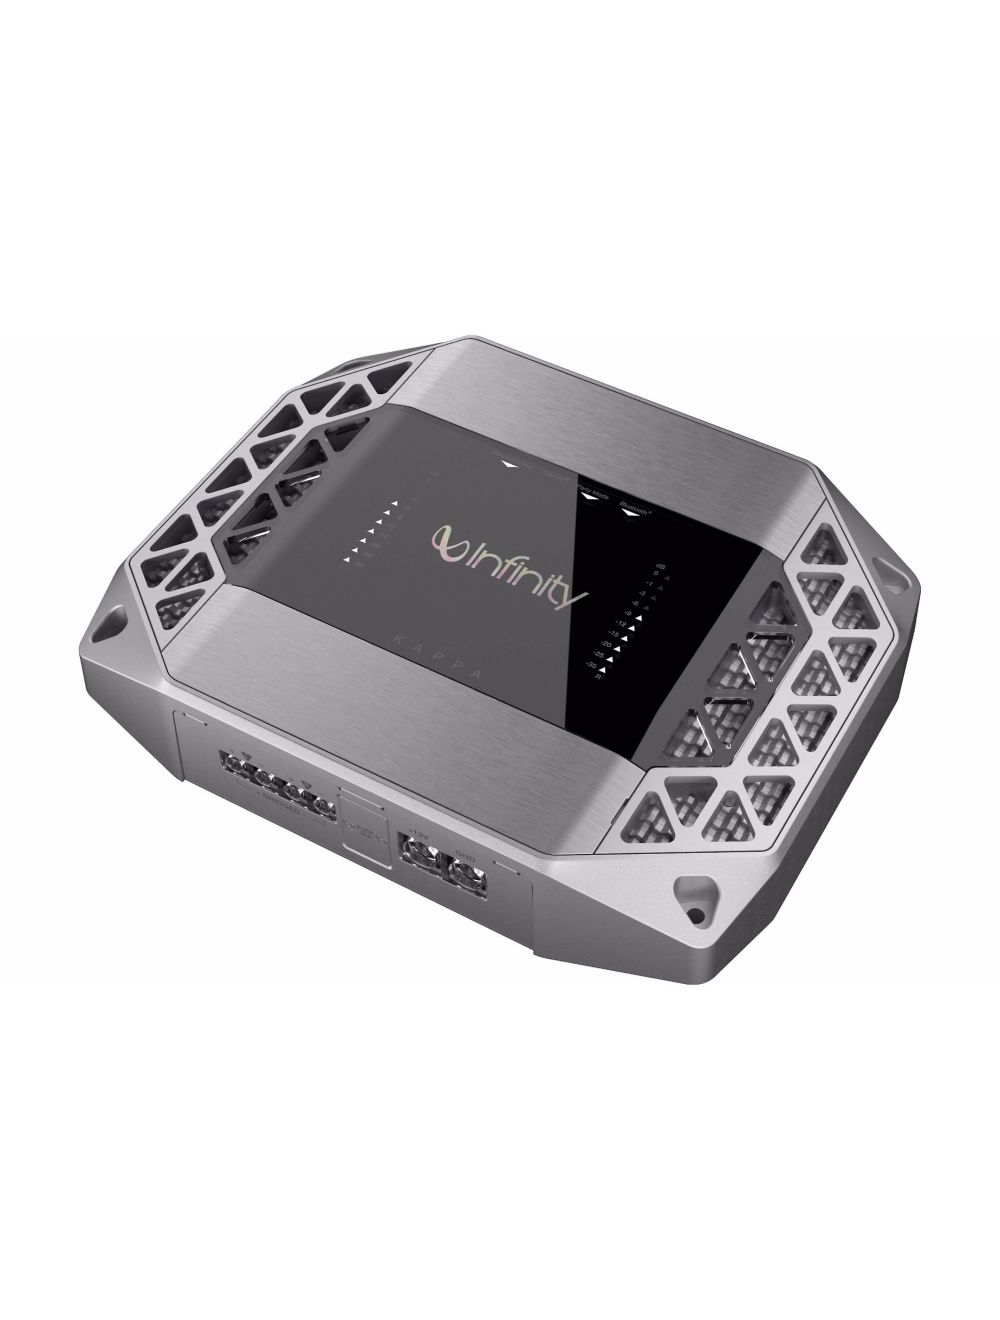 Infinity Kappa K2 car amplifier with Bluetooth (Discontinuted)